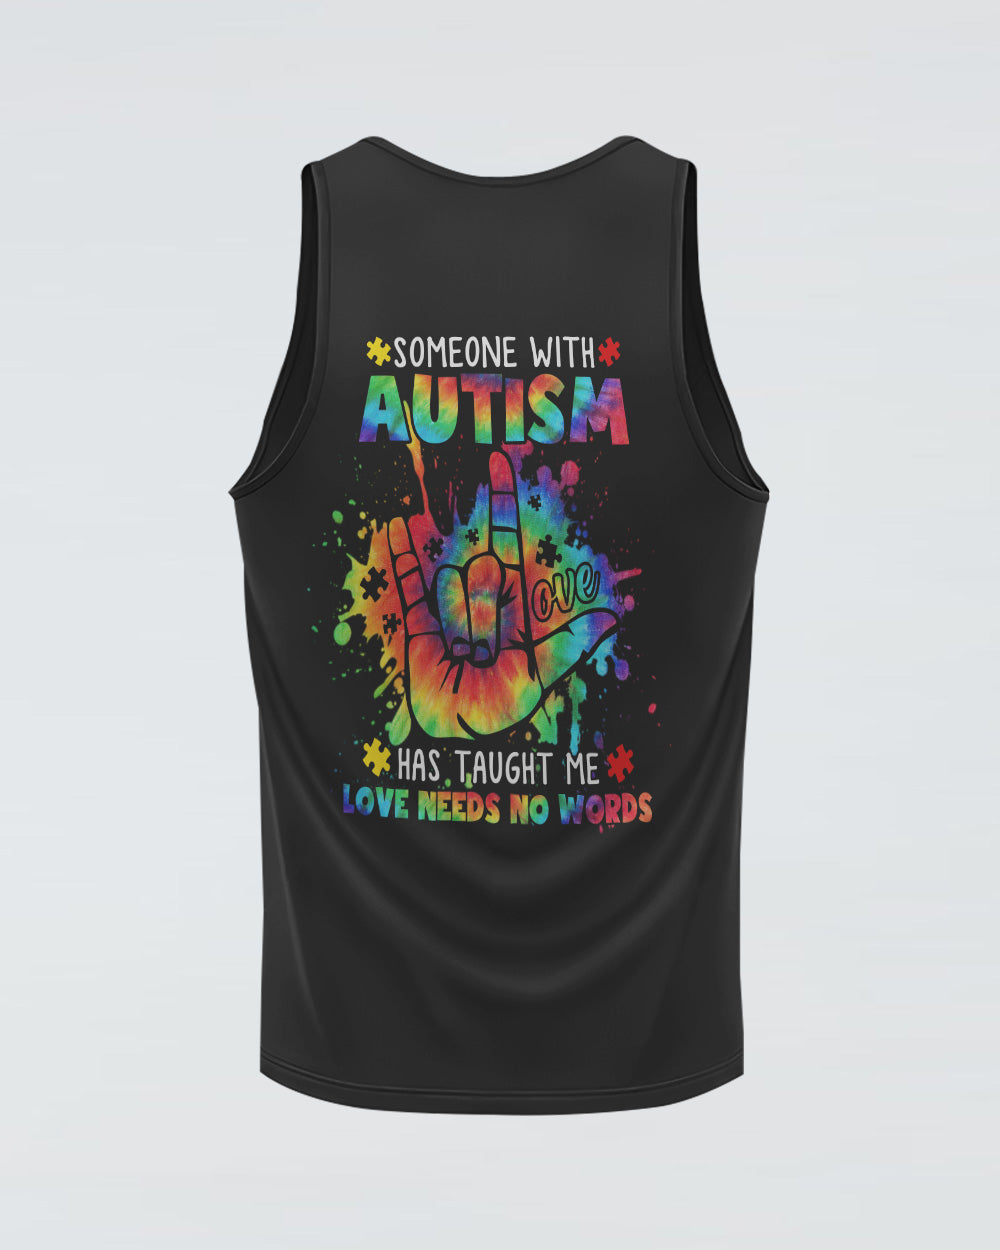 Someone With Autism Has Taught Me Women's Autism Awareness Tanks